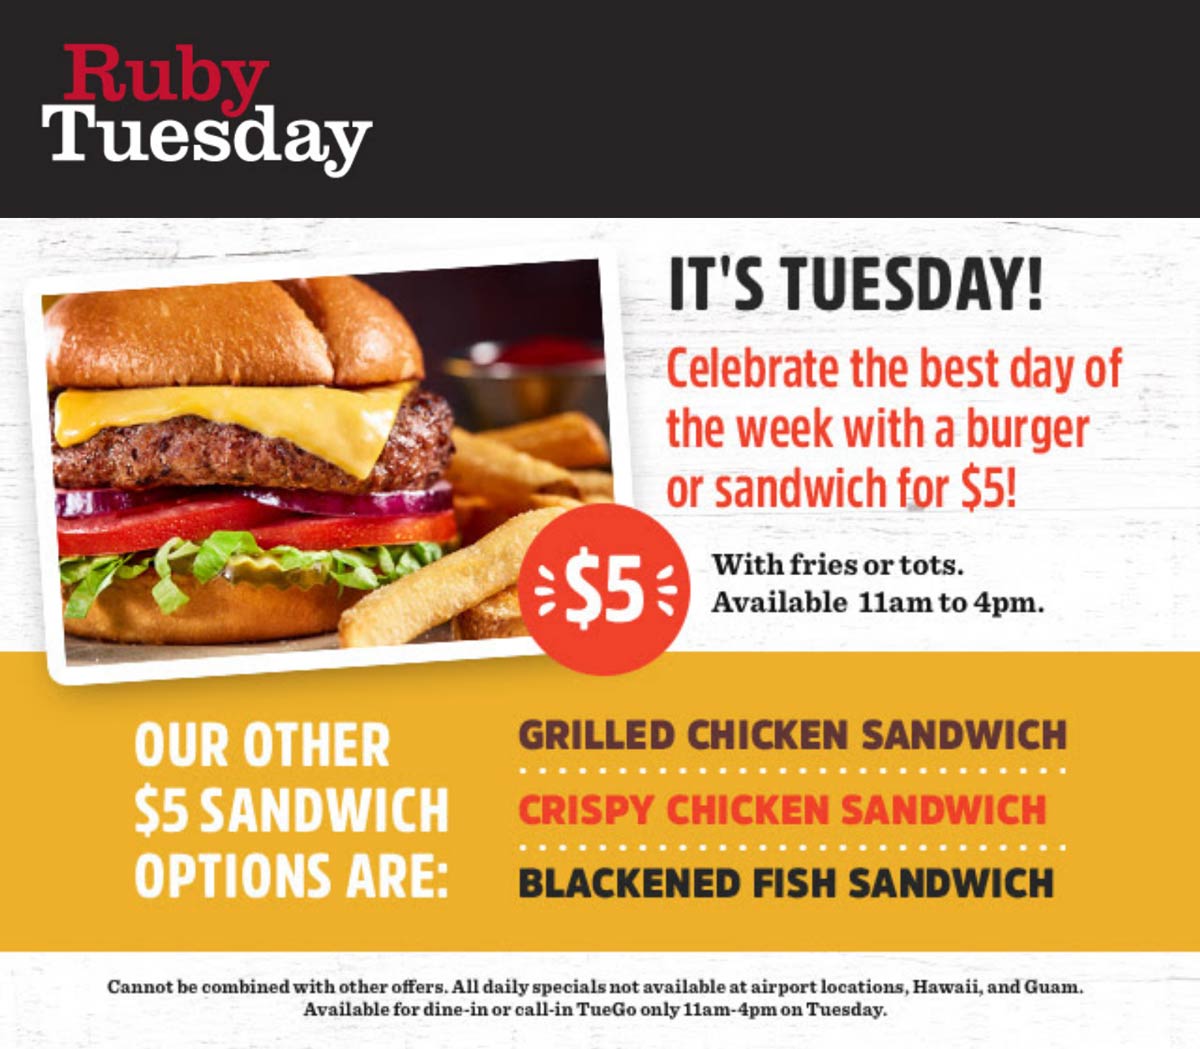 Ruby Tuesday restaurants Coupon  Chicken sandwich, fish or cheeseburger + fries = $5 Tuesdays til 4p at Ruby Tuesday #rubytuesday 